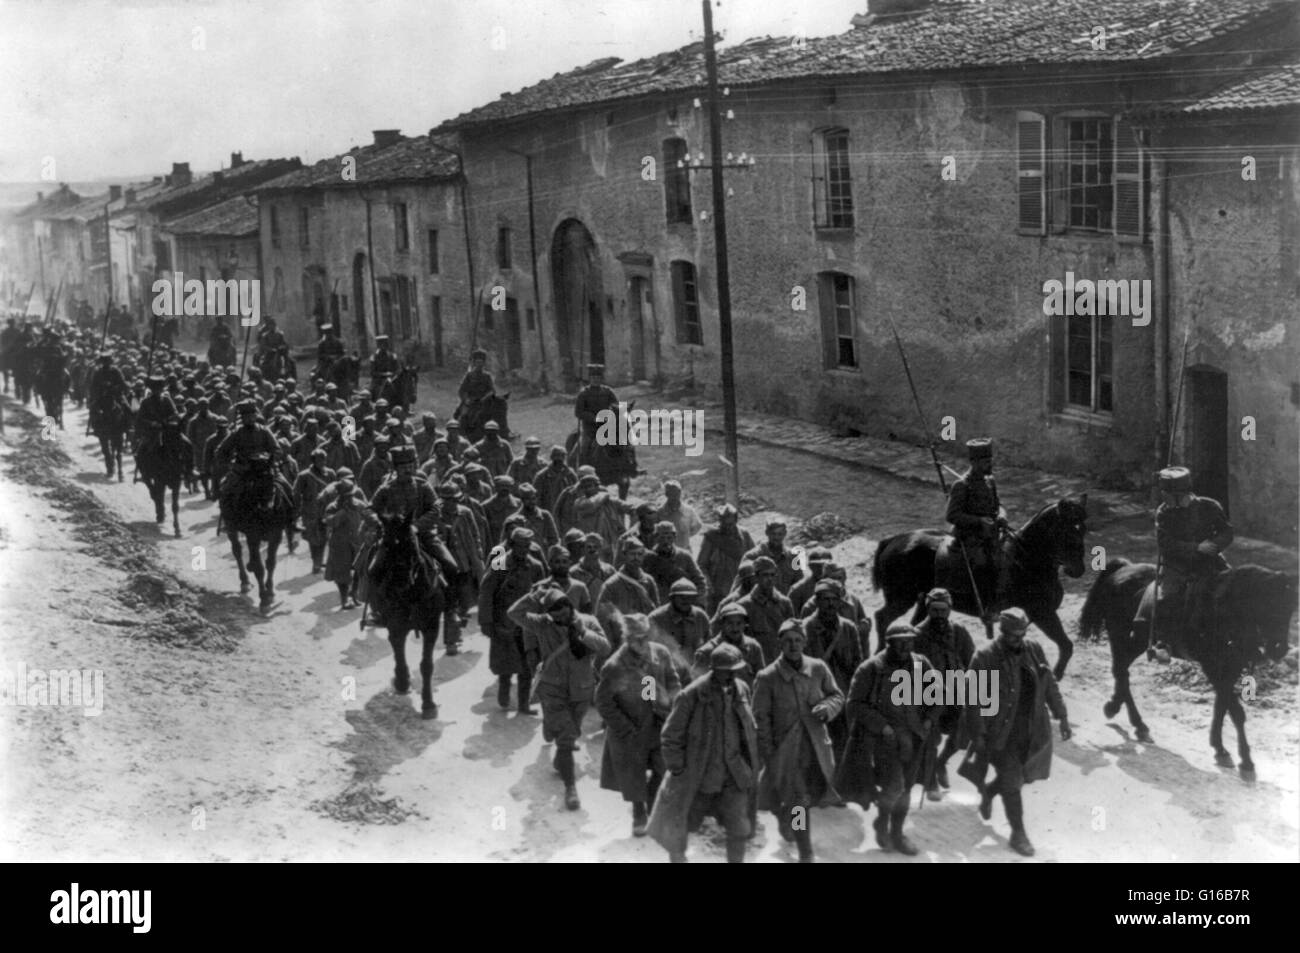 Bringing in French prisoners in a suburb of Verdun, France, 1916. Verdun was the site of a major battle of the First World War. One of the costliest battles of the war, Verdun exemplified the policy of a 'war of attrition' pursued by both sides, which led Stock Photo